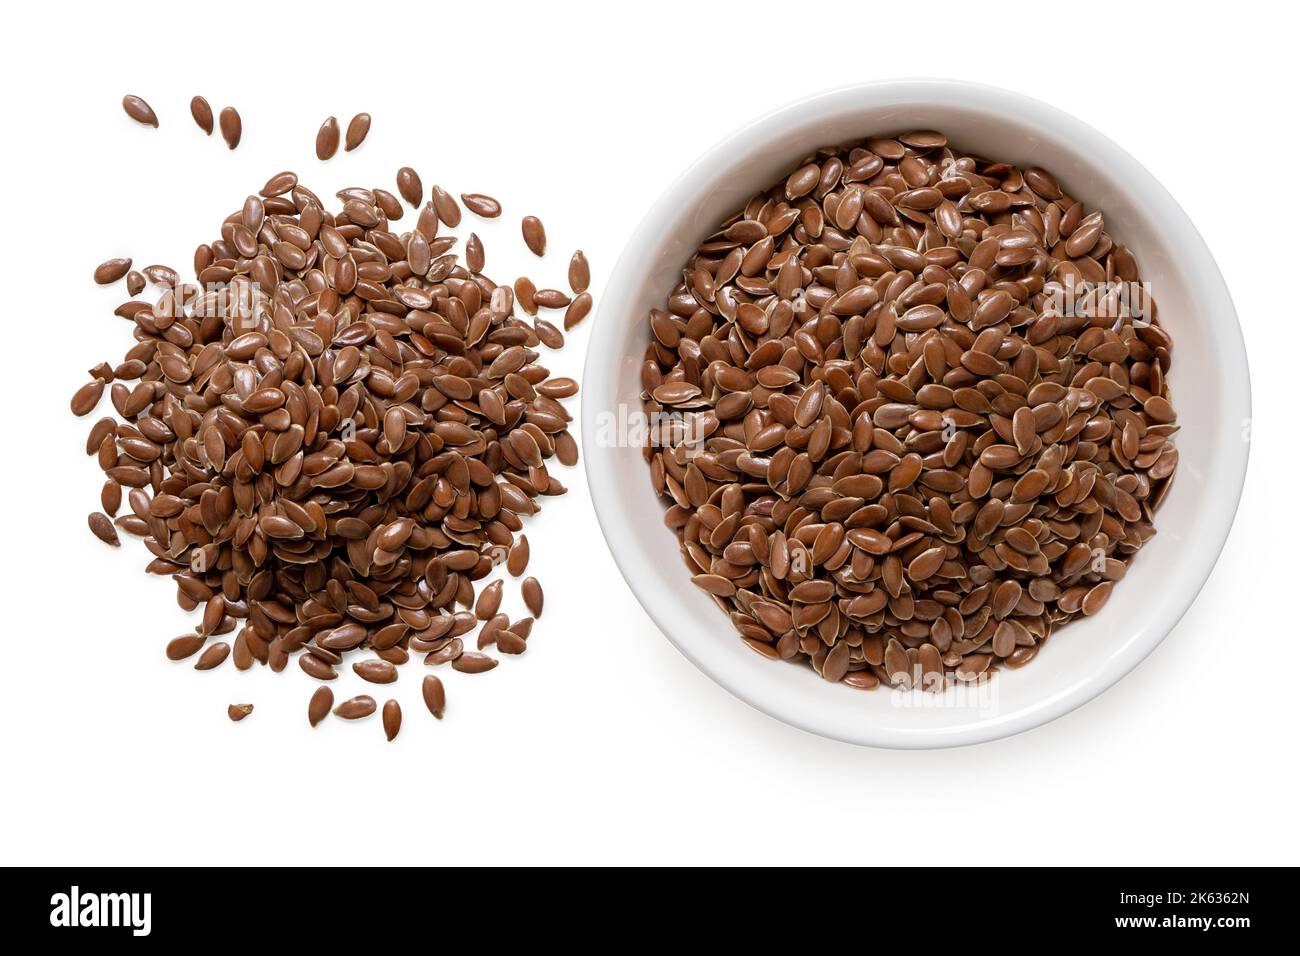 Flax seeds in a white ceramic bowl next to a pile of flax seeds isolated on white. Top view. Stock Photo